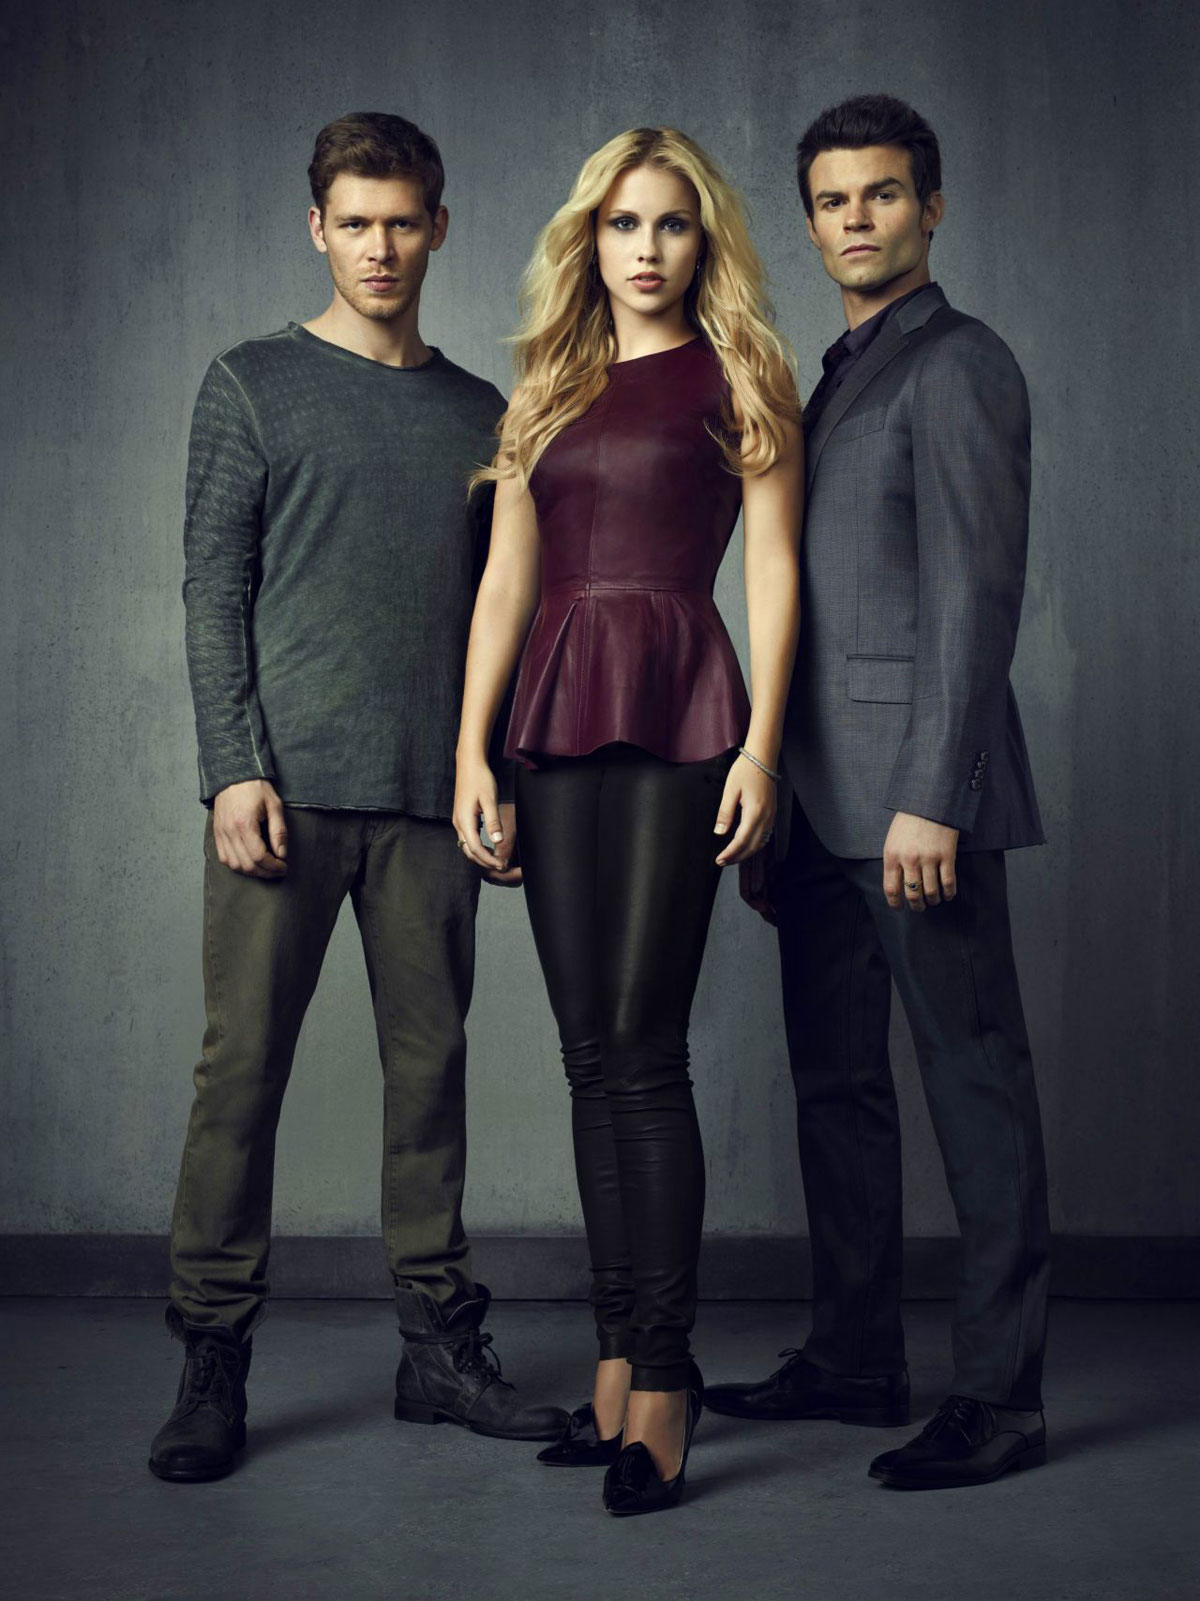 Claire Holt photosooting for The Vampire Diaries tv series promo